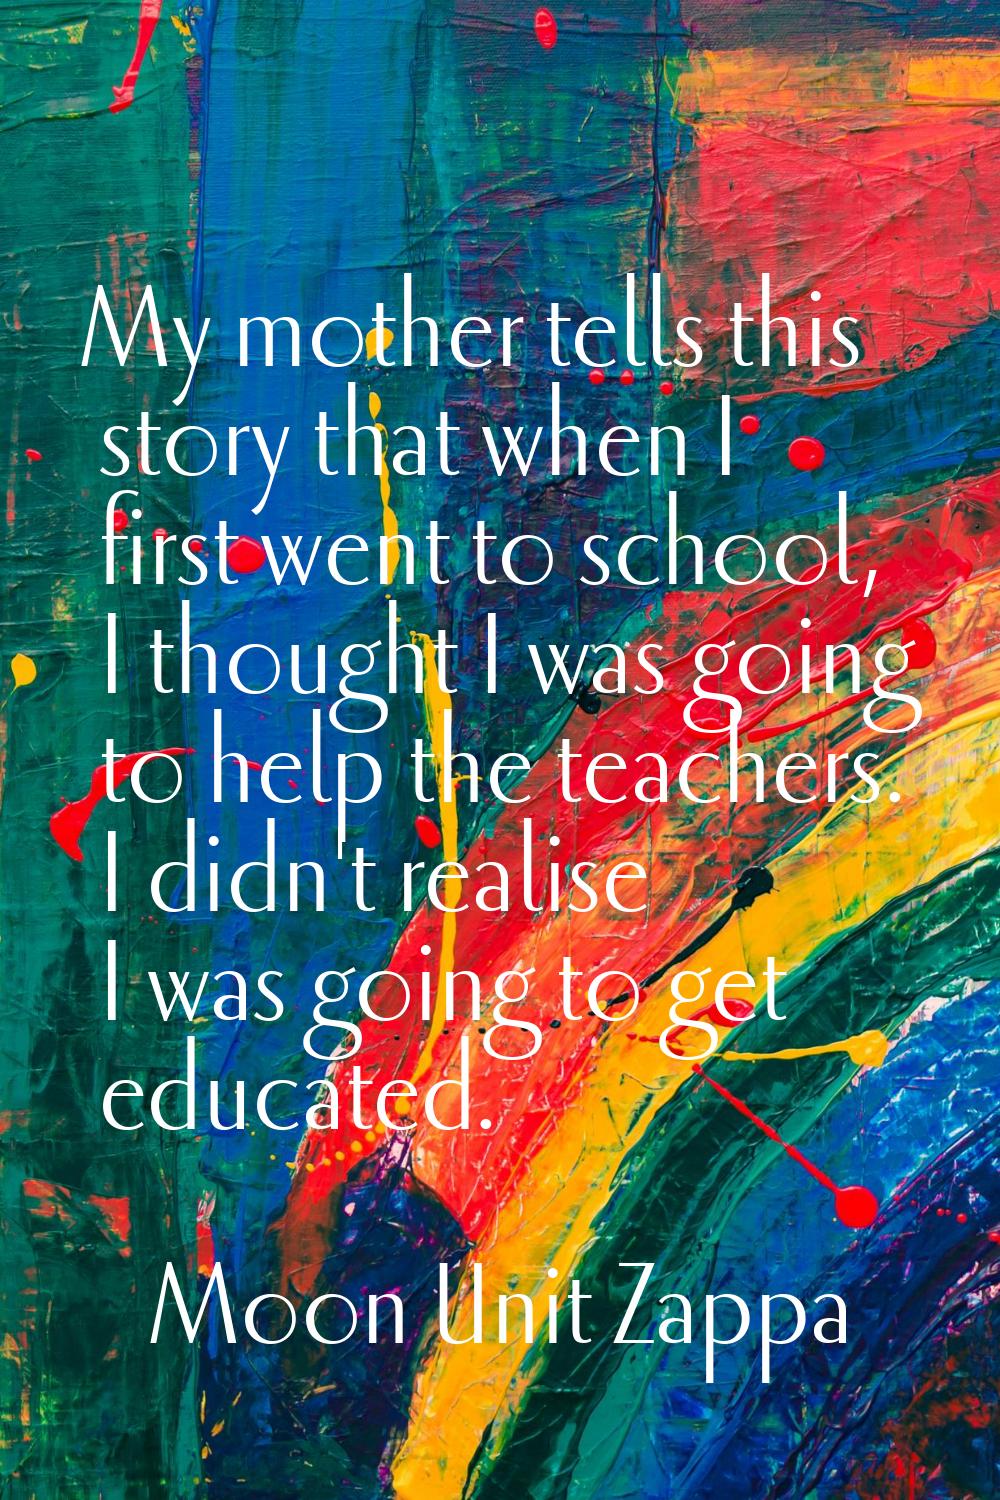 My mother tells this story that when I first went to school, I thought I was going to help the teac